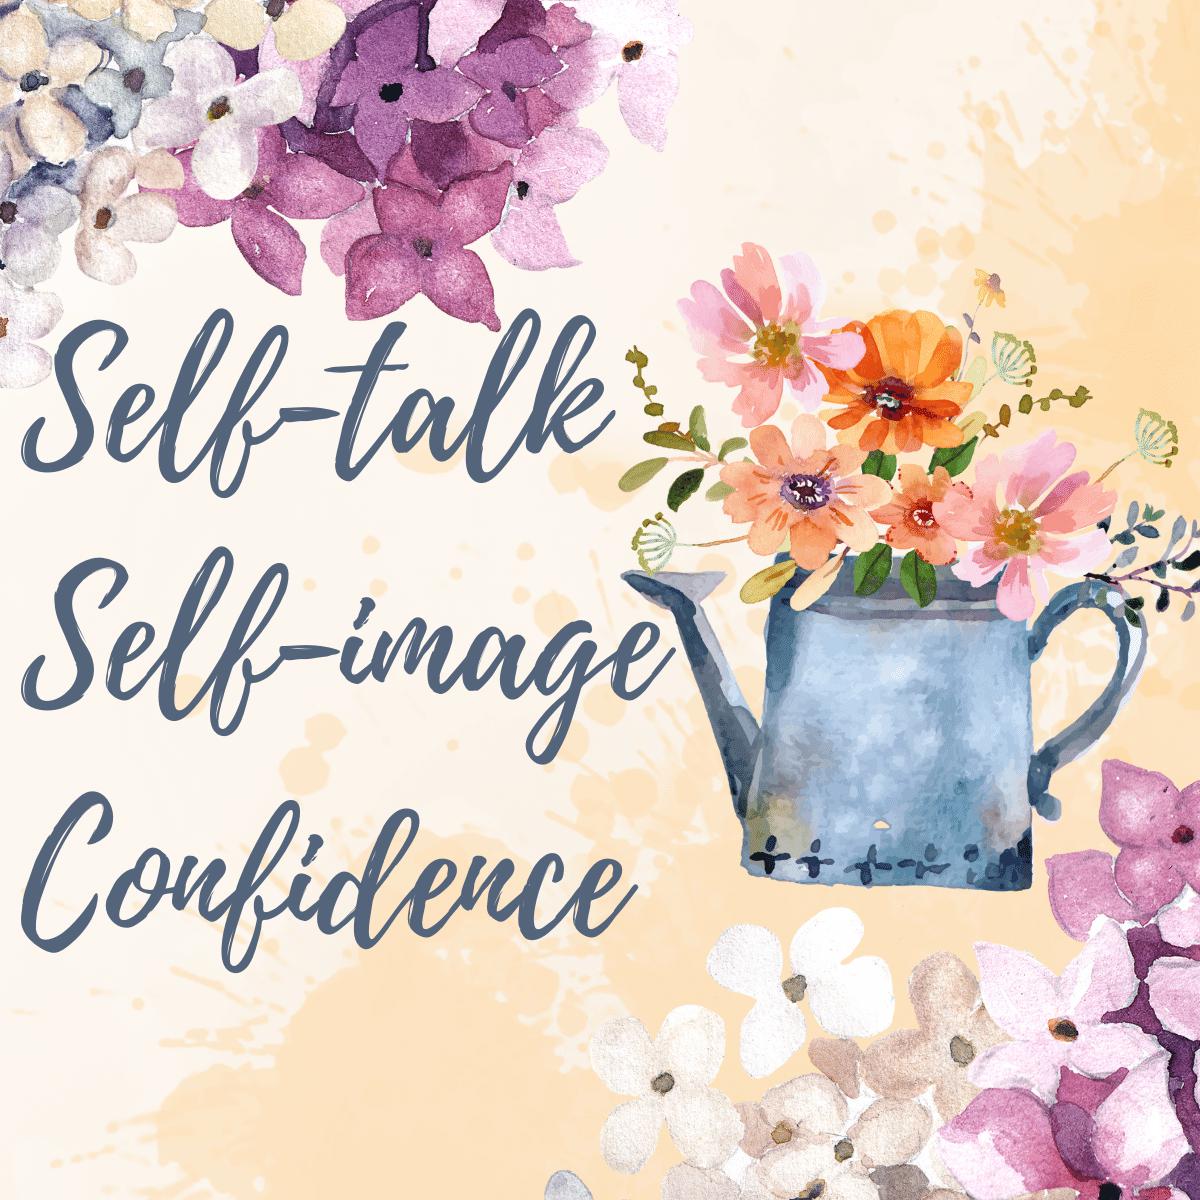 How does self-talk affect your self-image and confidence?